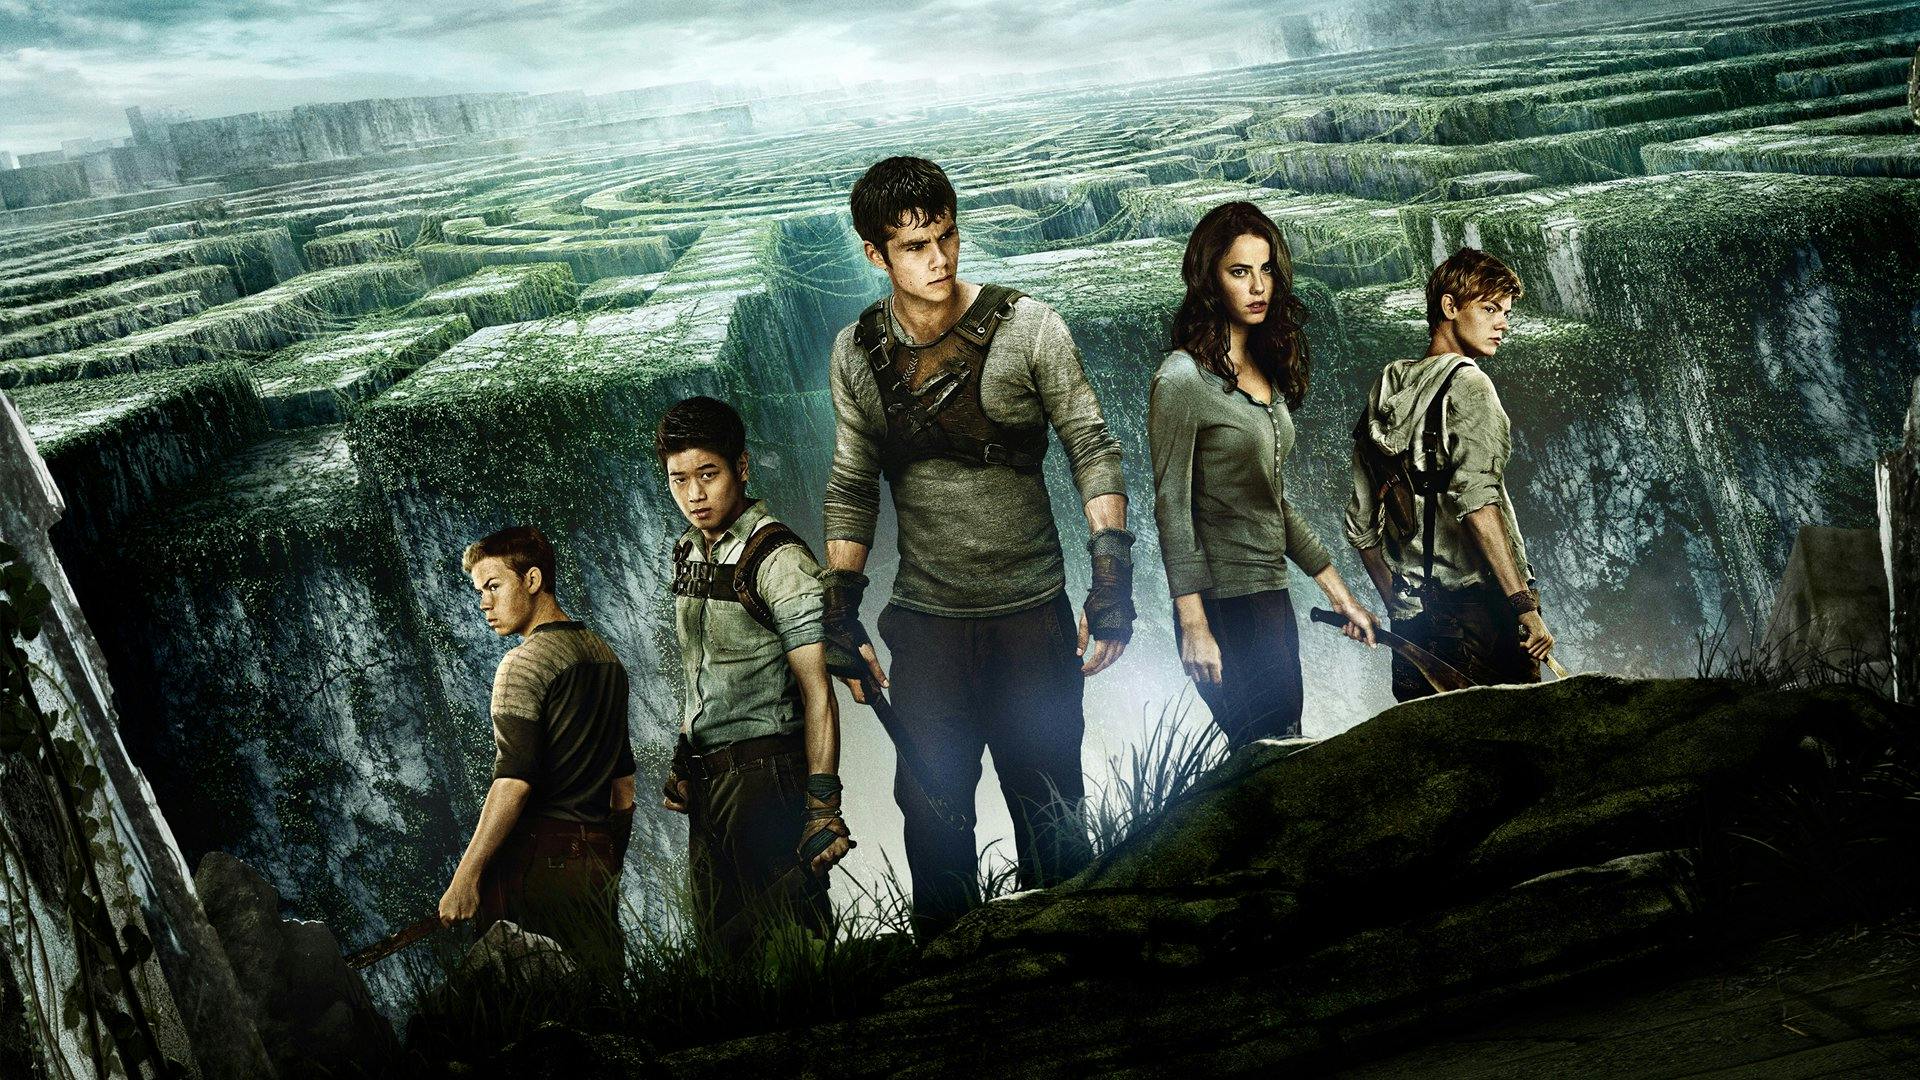 The Last Thing I See: 'The Maze Runner' Movie Review